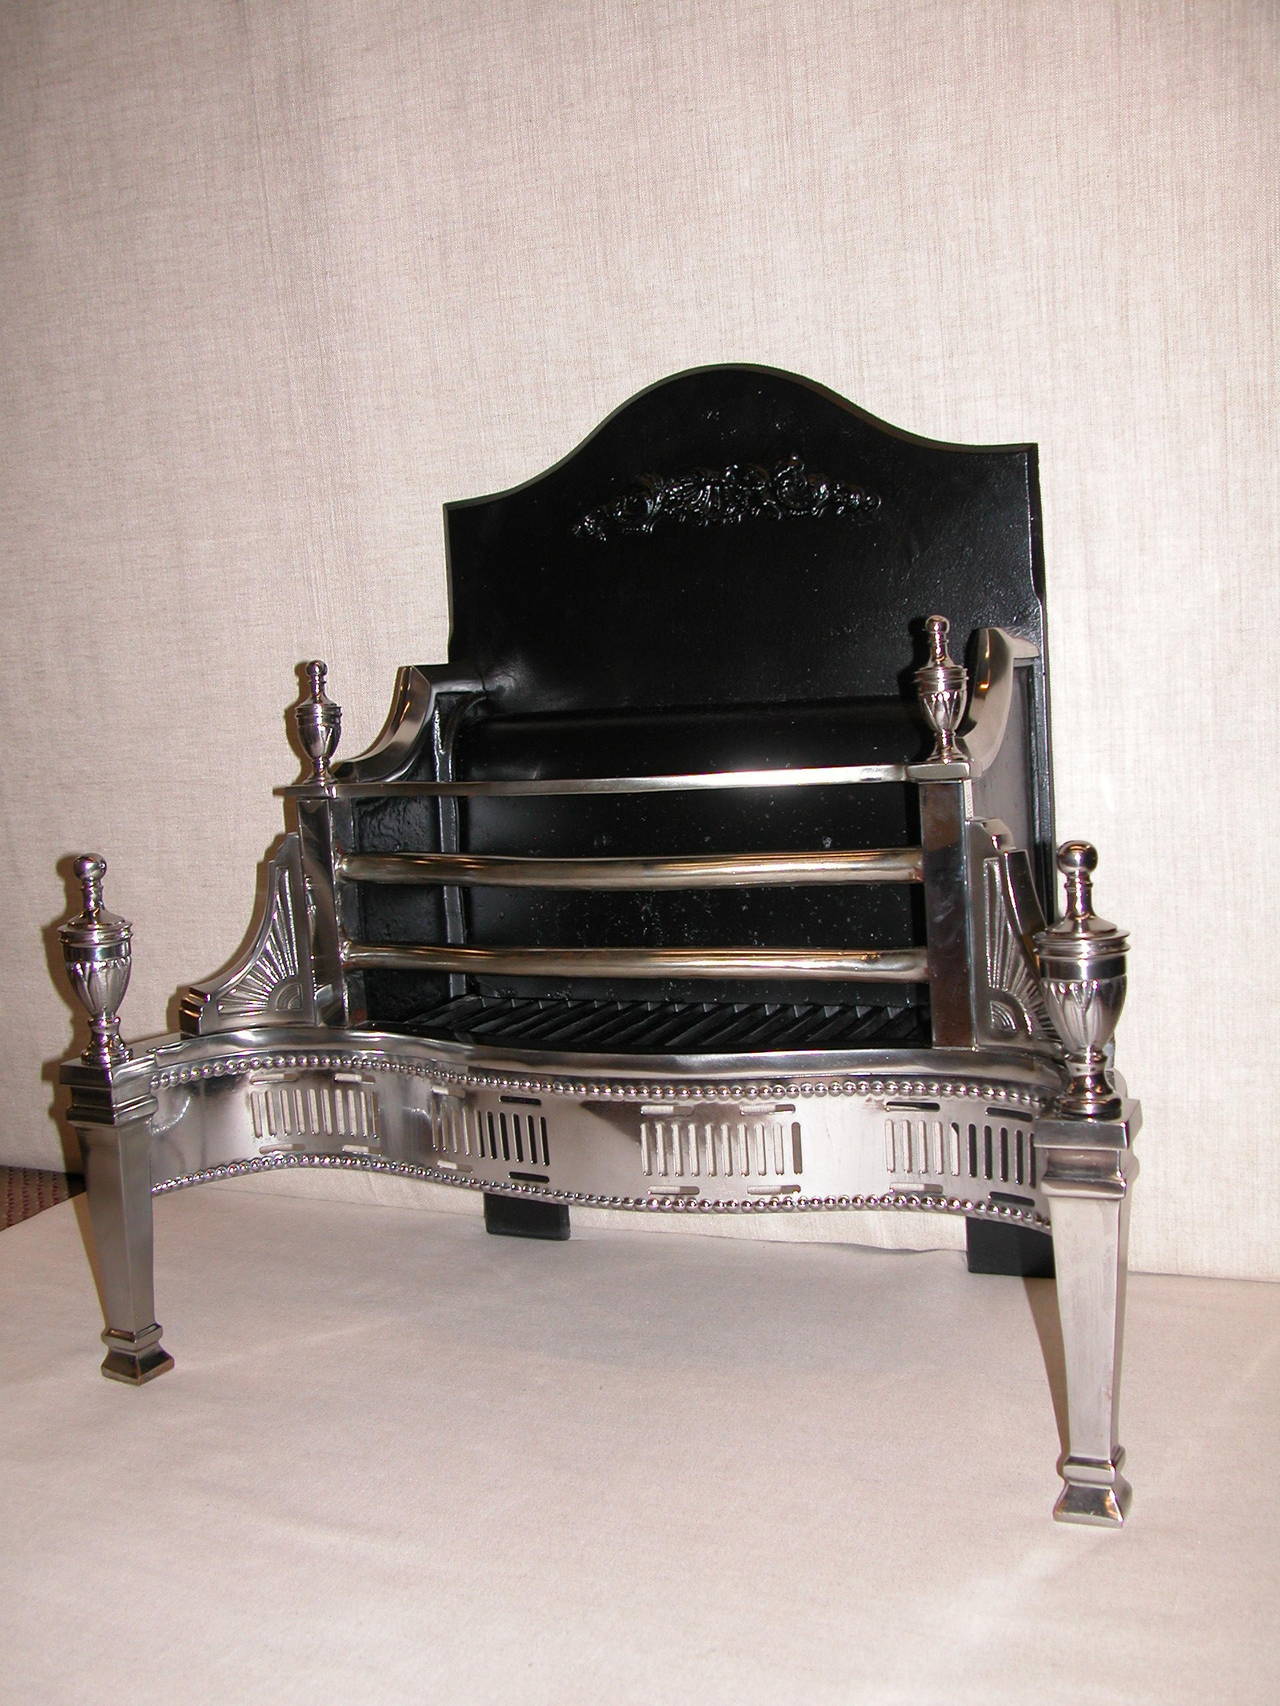 American 19th Century Polished Steel Fireplace Insert in the Georgian Style